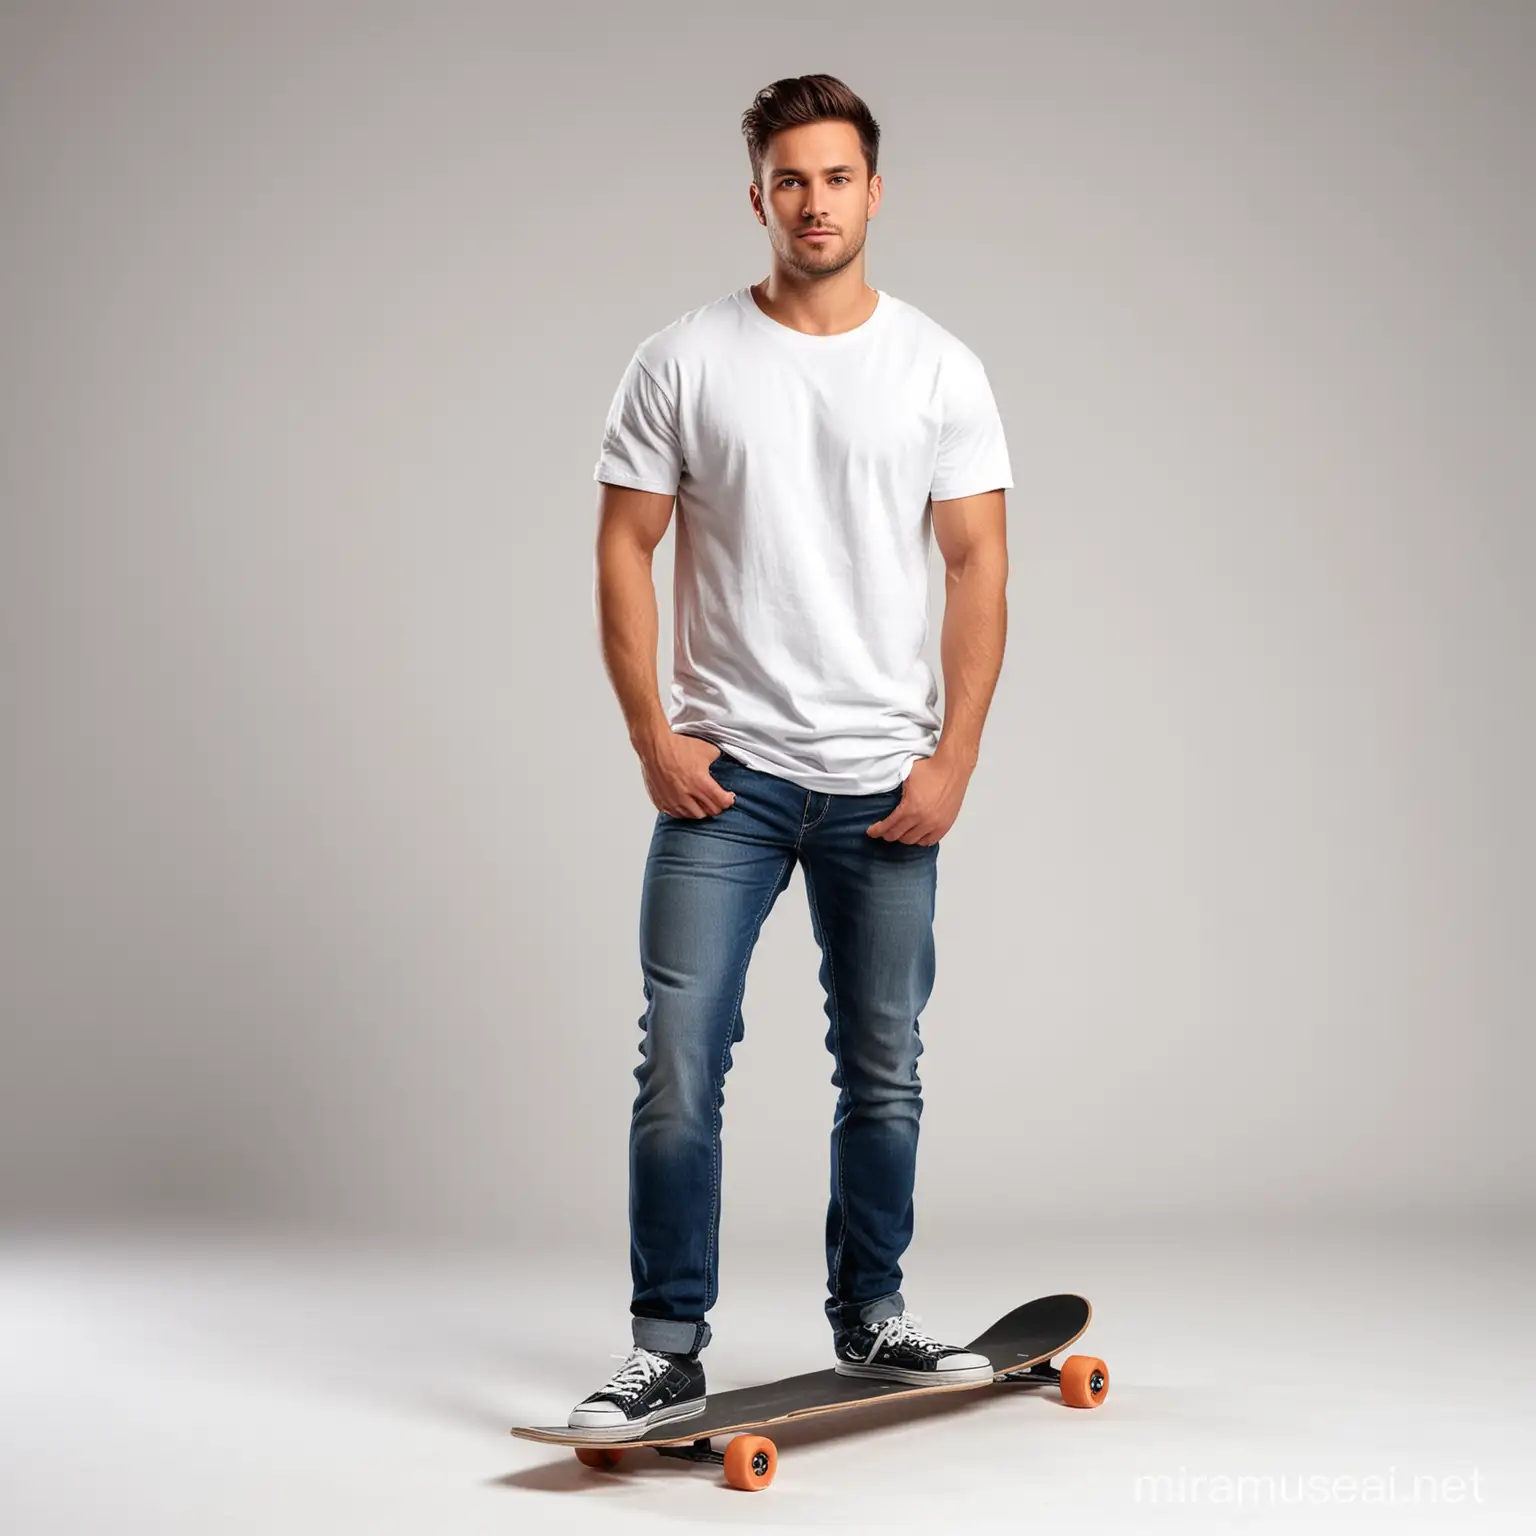 Standing photorealistic attractive man 25 years old in jeans and plain white t-shirt without pockets holding longboard in hand, full body front view including shoes perpendicular to lens in photo studio on white background.